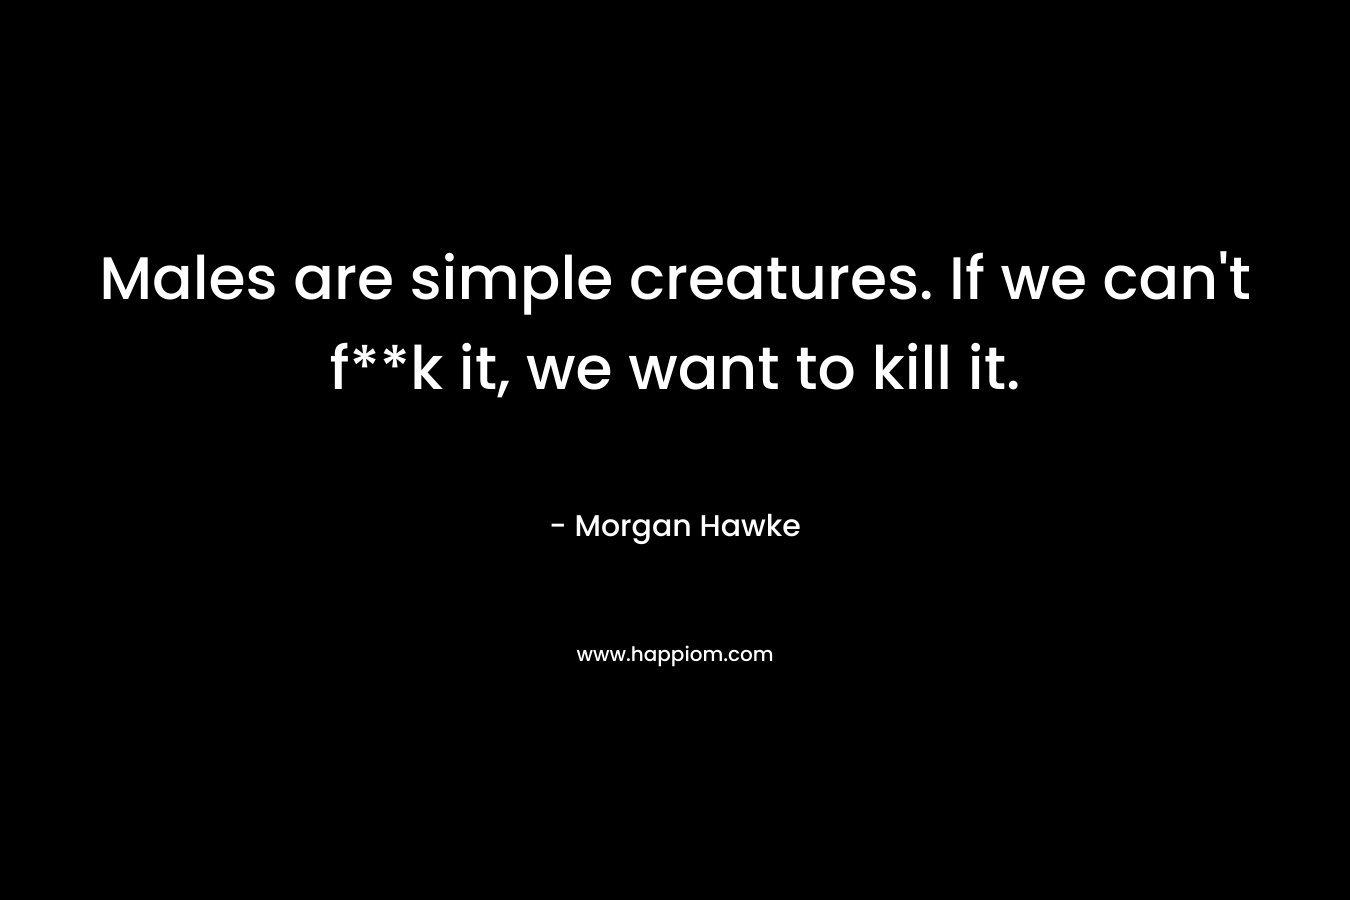 Males are simple creatures. If we can’t f**k it, we want to kill it. – Morgan Hawke